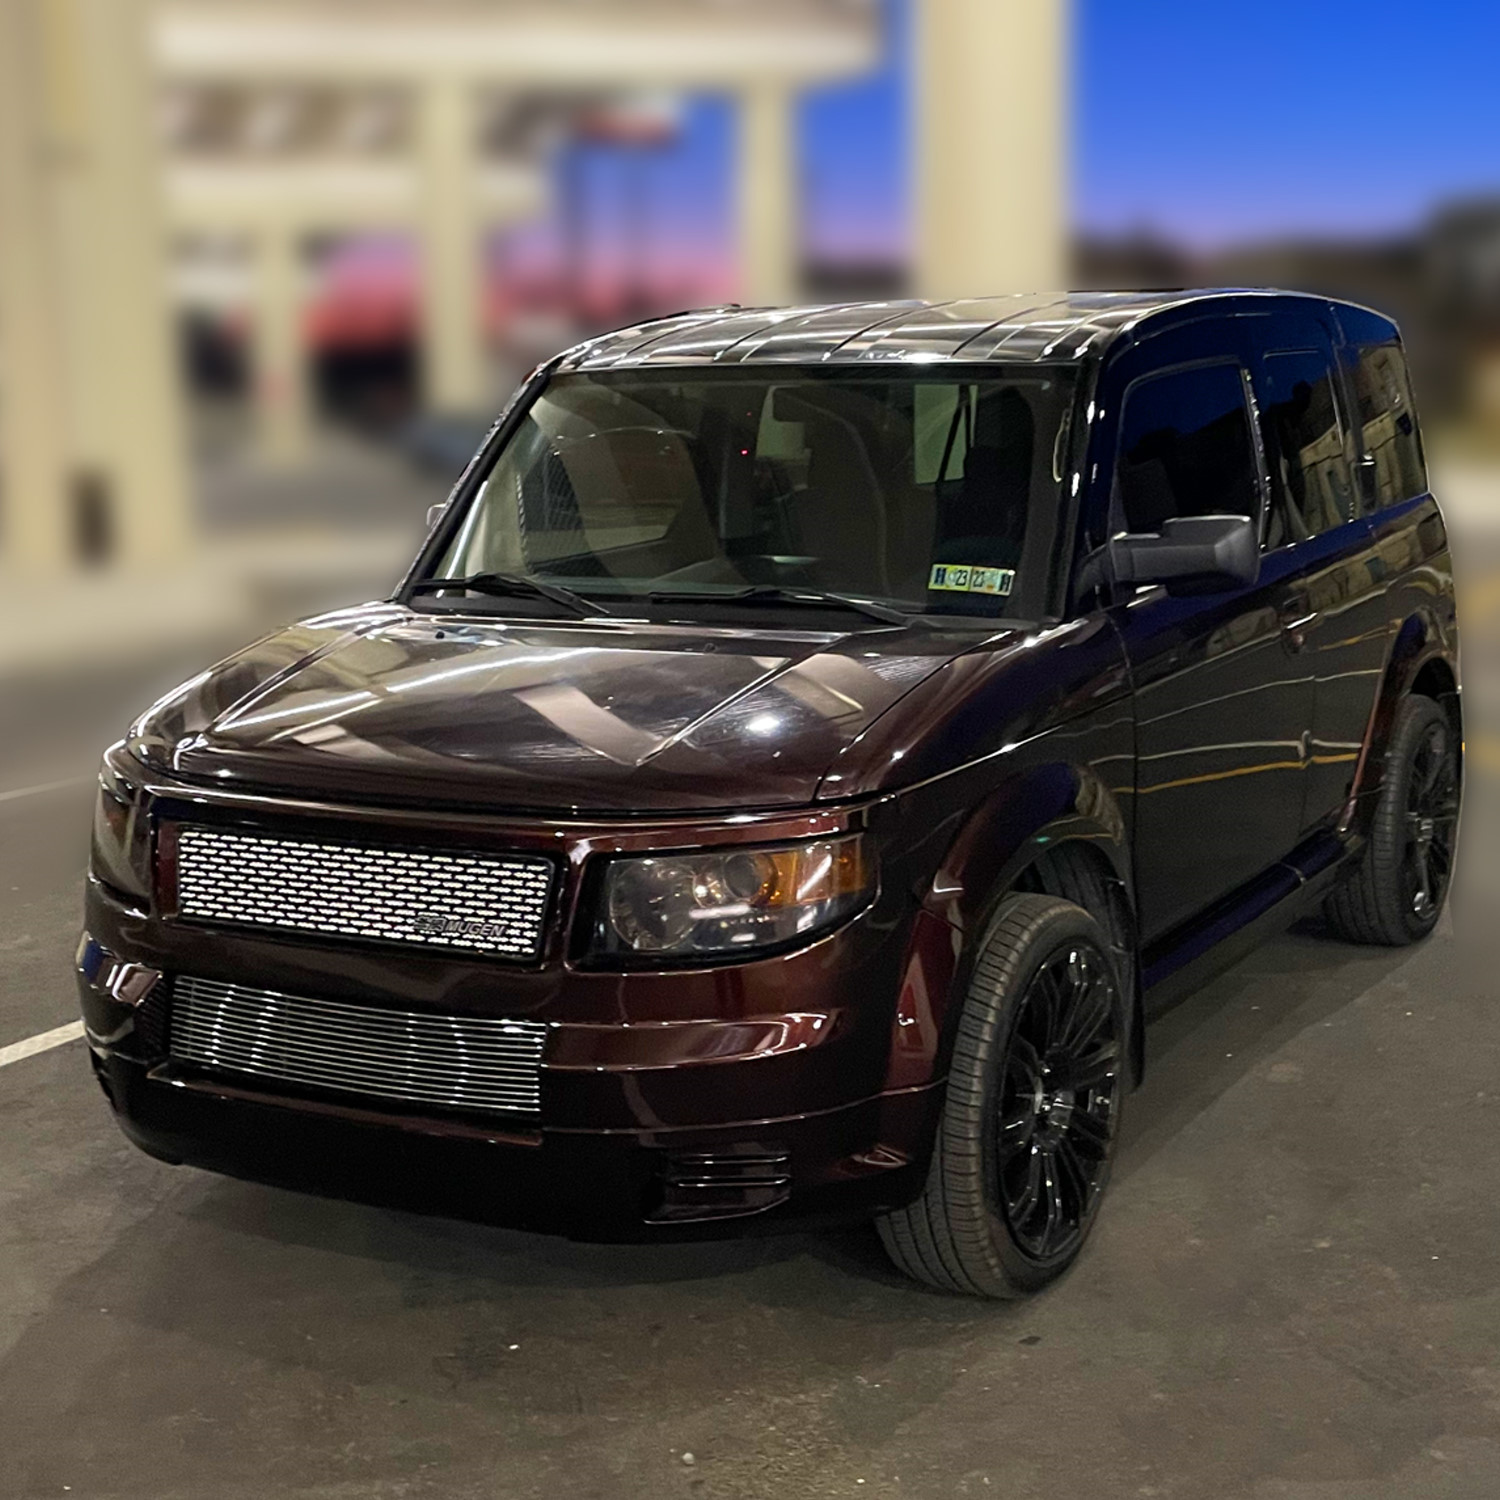 Get Ready to Turn Heads with Our Custom HD Perf SS Mesh Grille for Your Honda Element